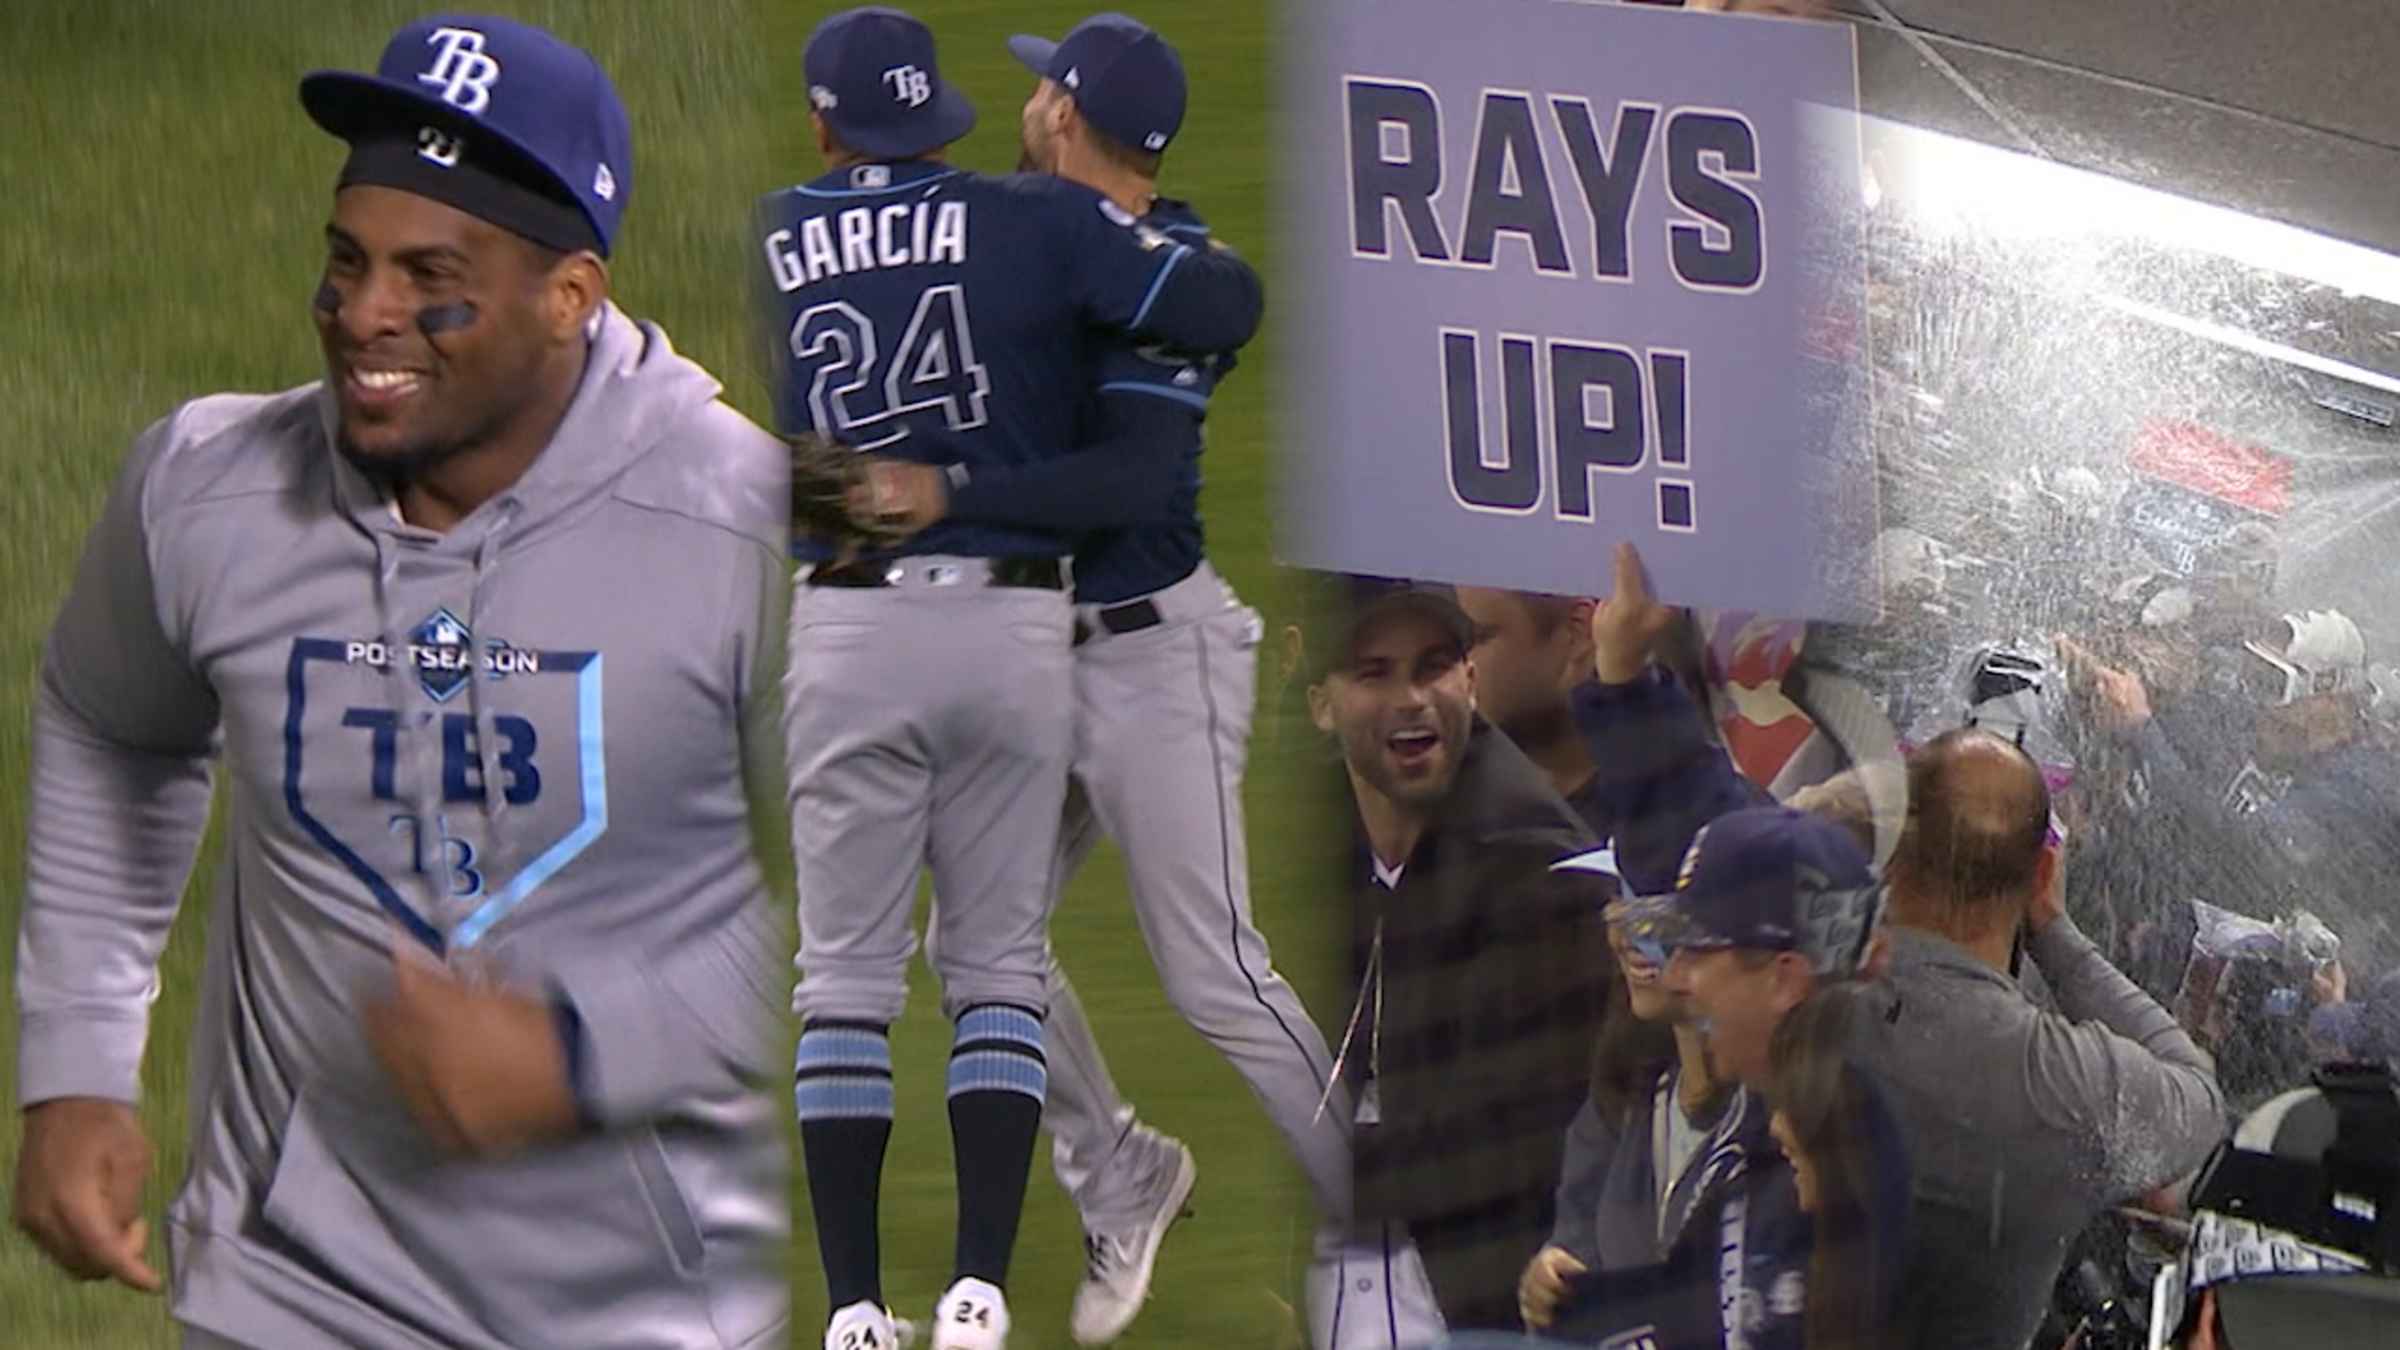 Series Recap: Rays sweep A's to improve to 9-0